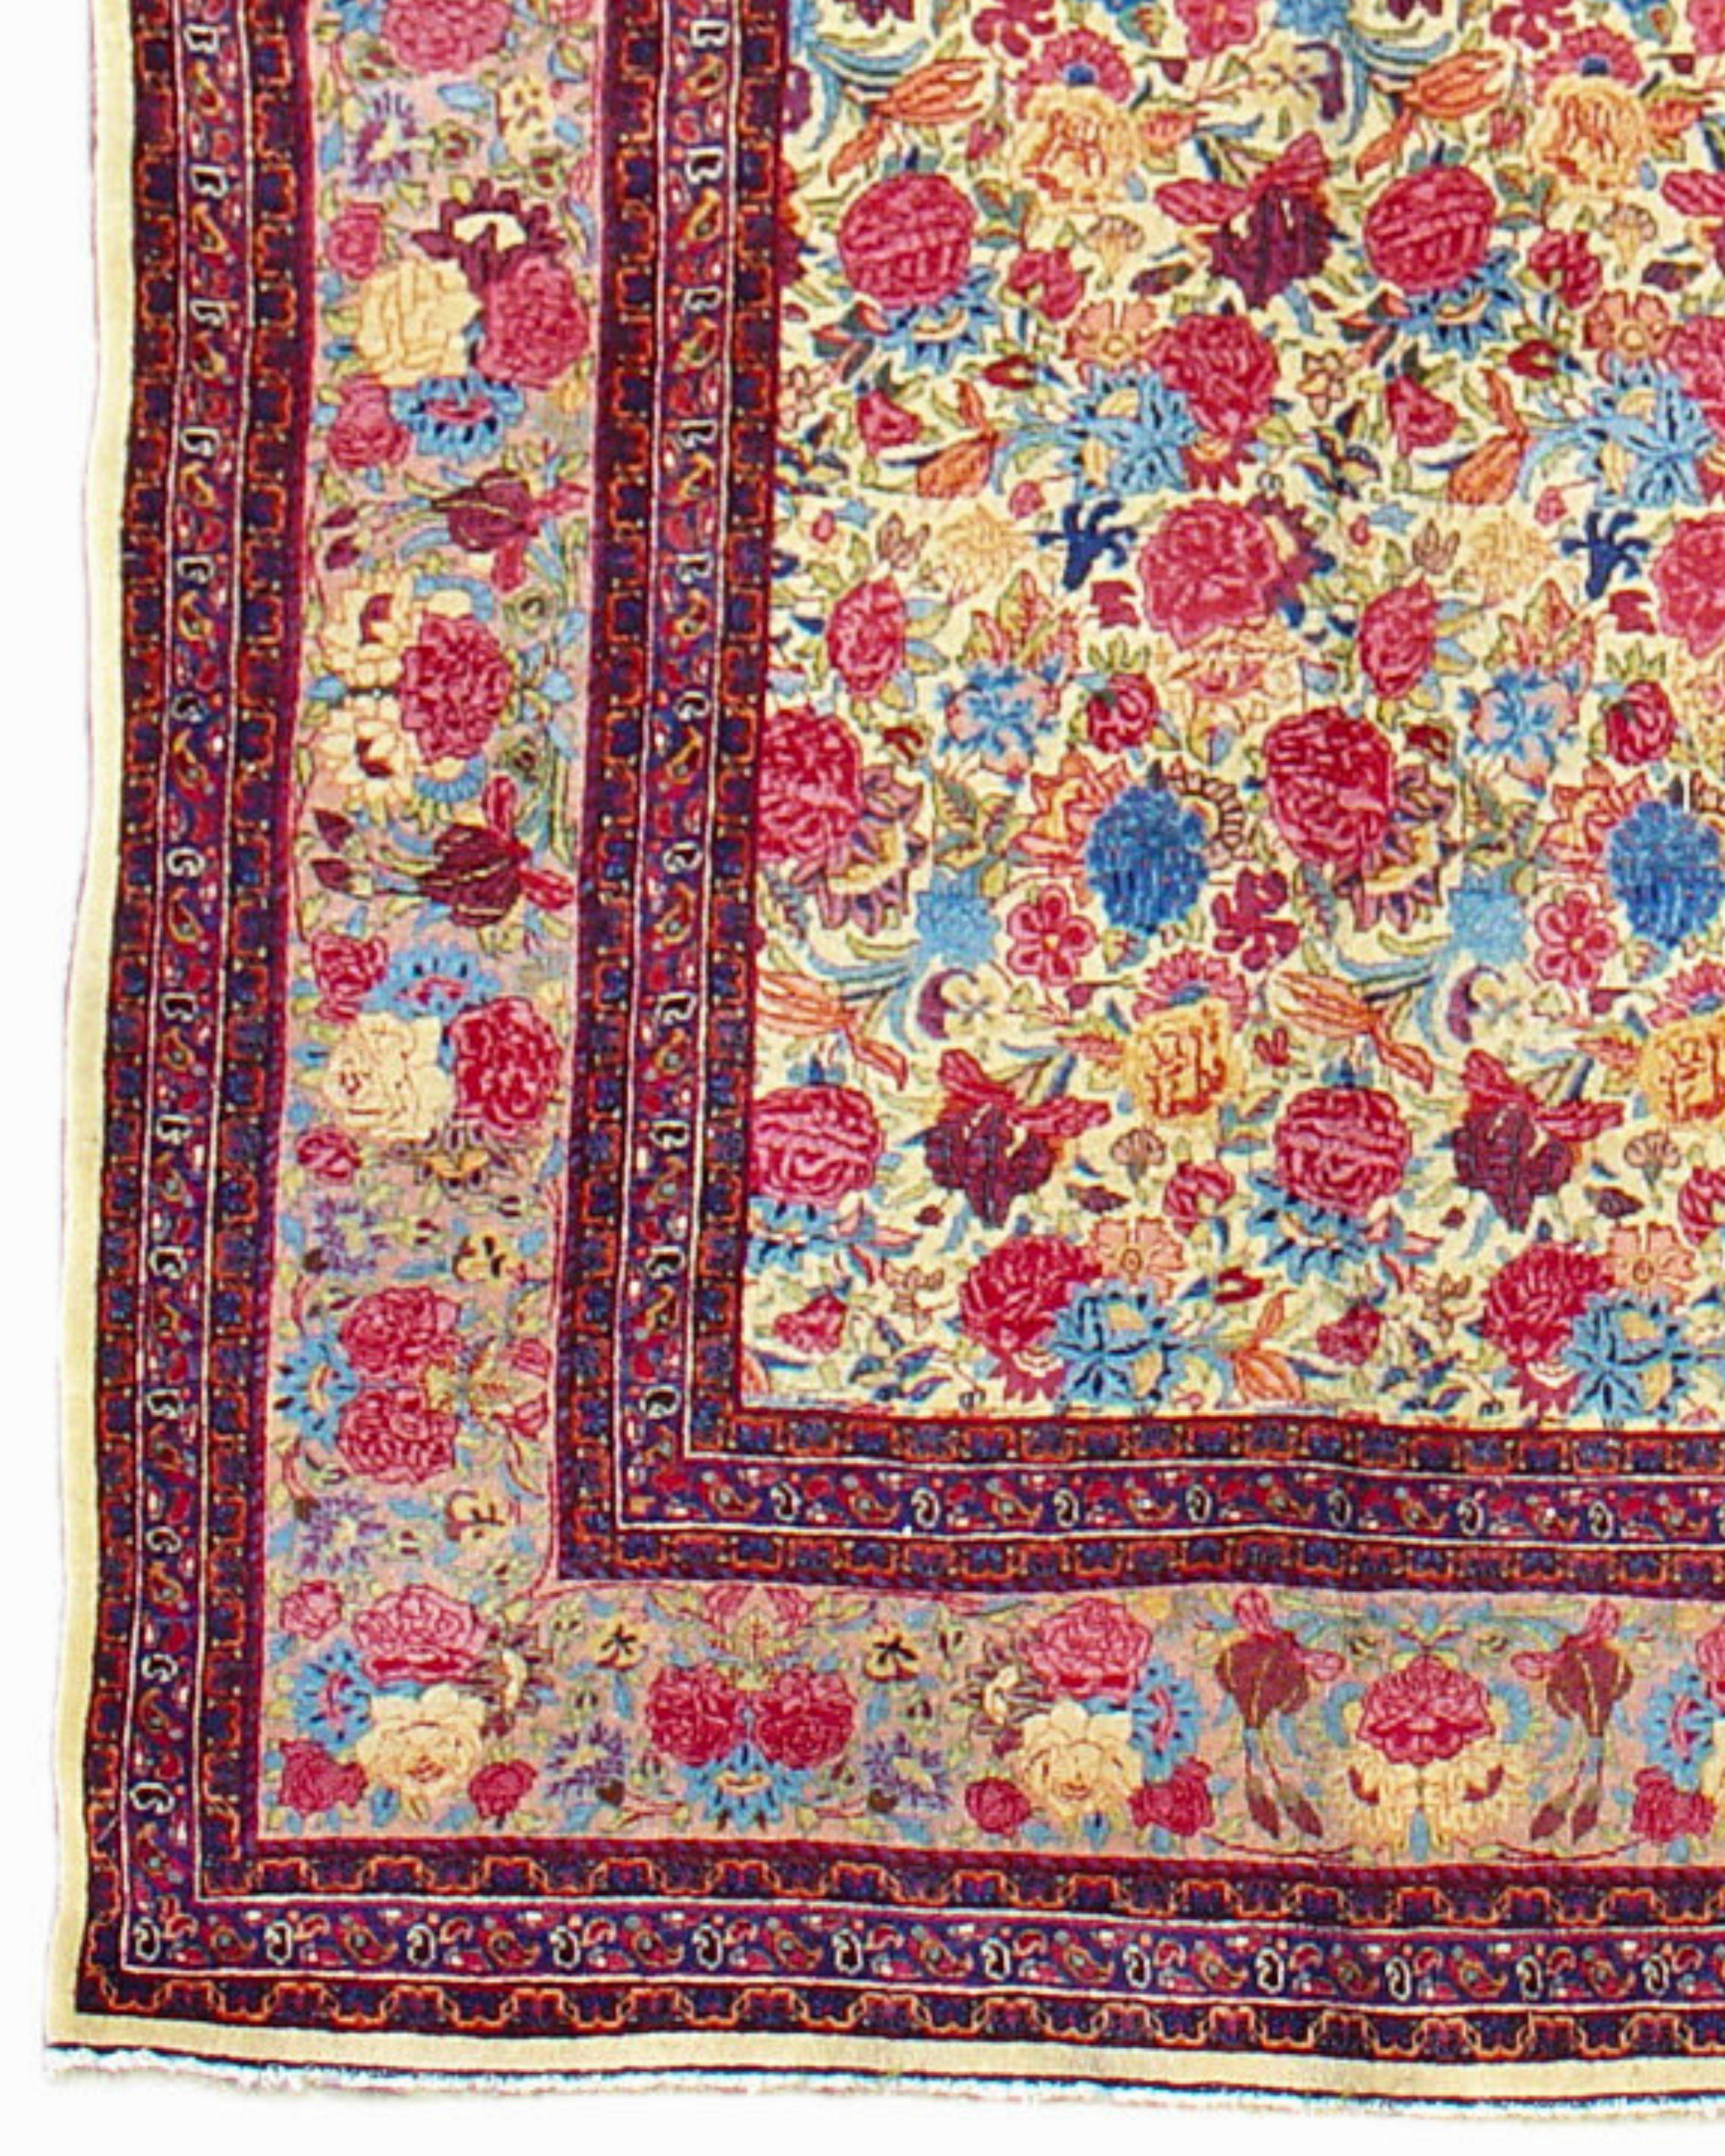 Antique Persian Mashad Carpet, 19th Century In Excellent Condition For Sale In San Francisco, CA